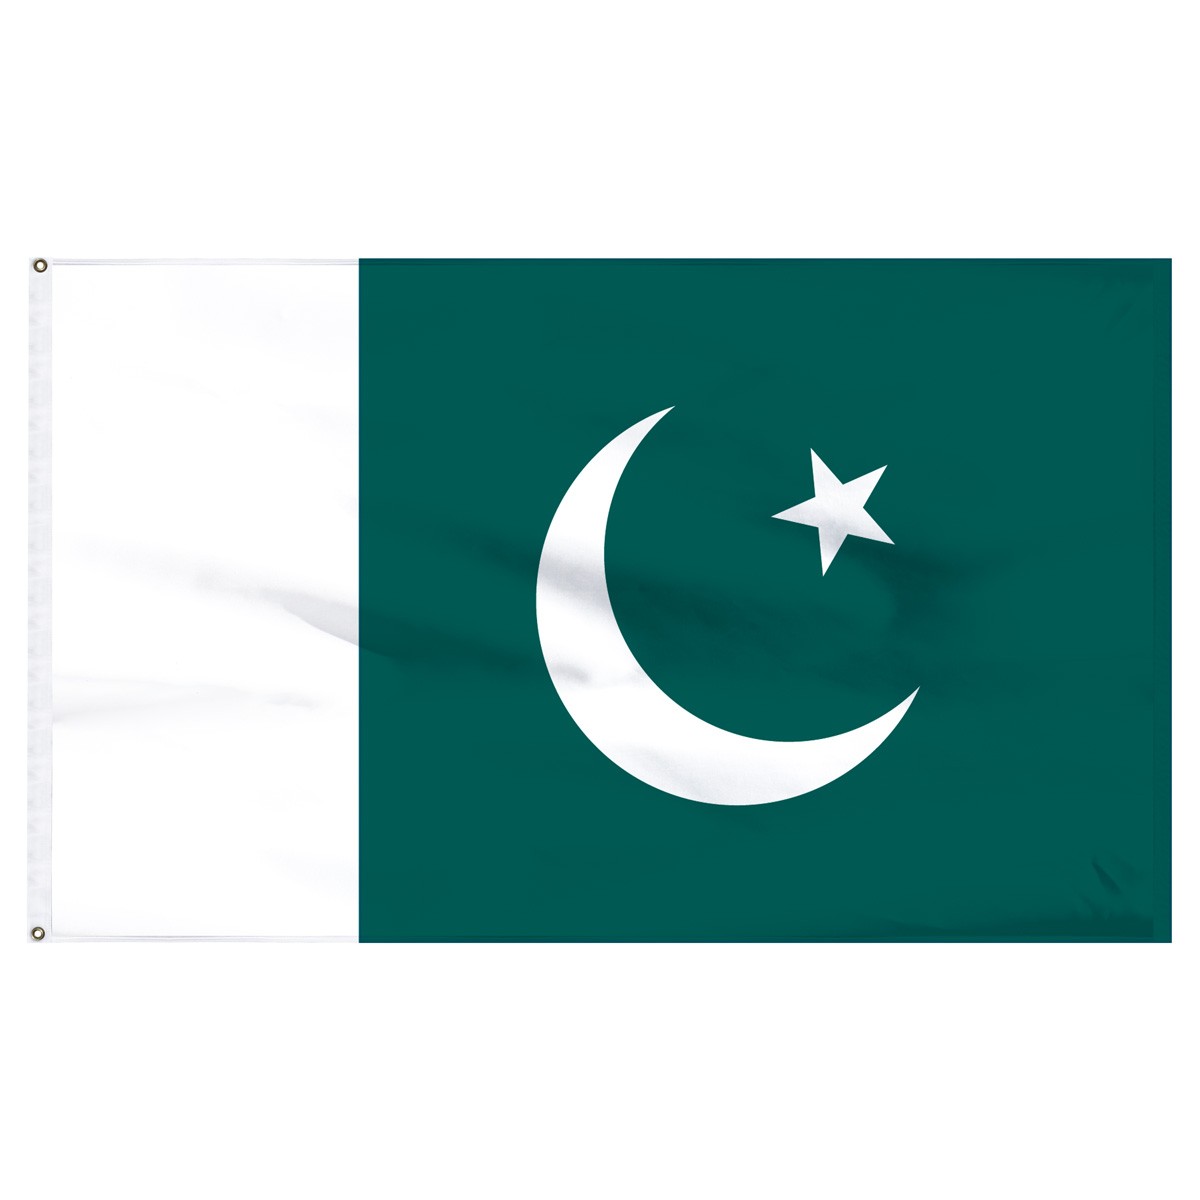 Pakistan Posters and Banners